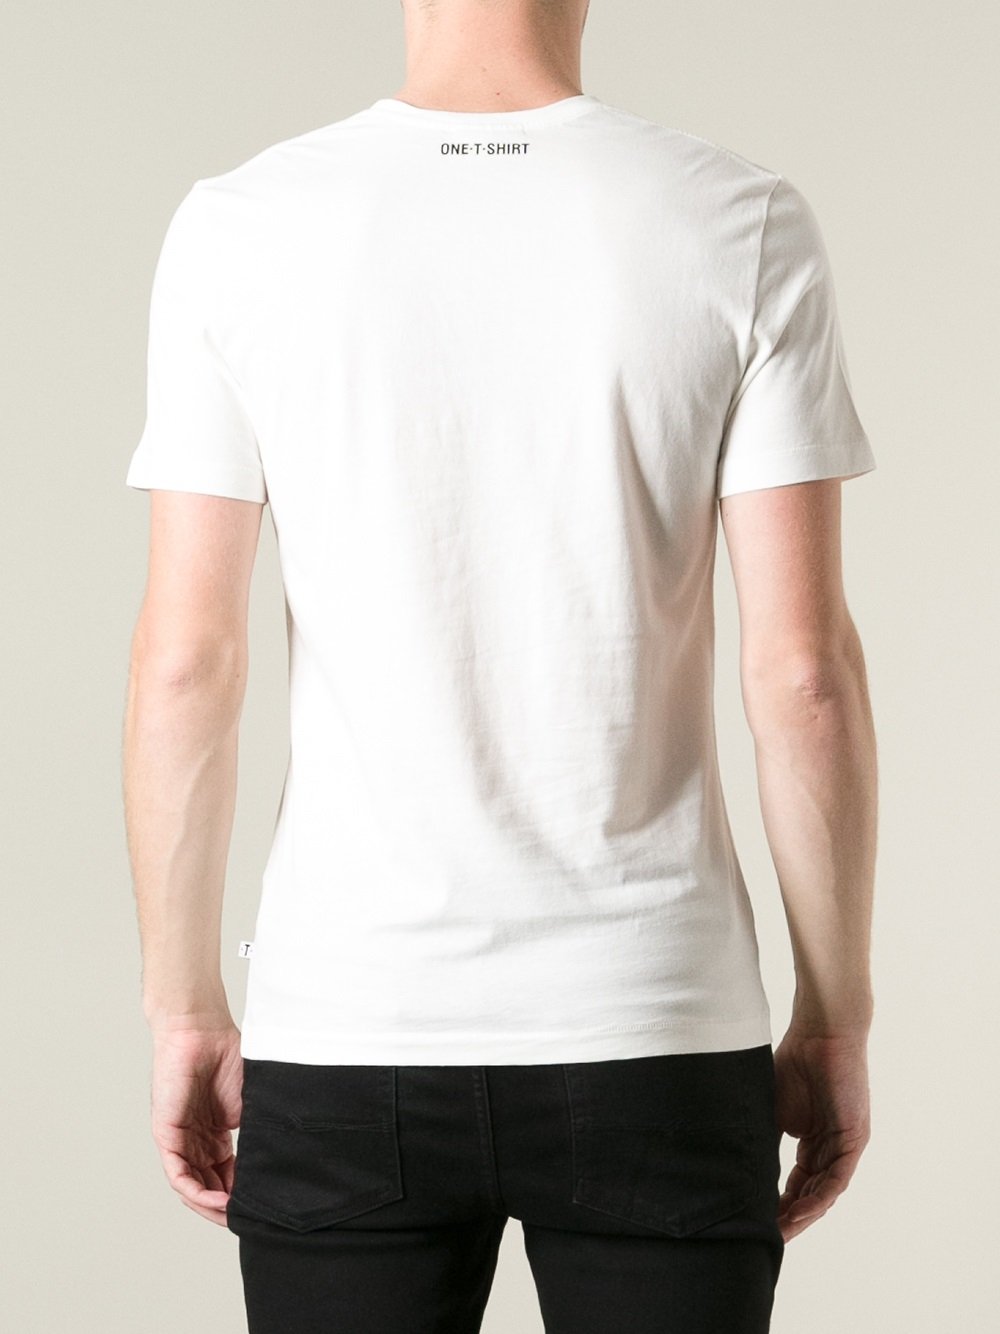 One T Shirt Tom Ford Printed Tshirt in White for Men - Lyst